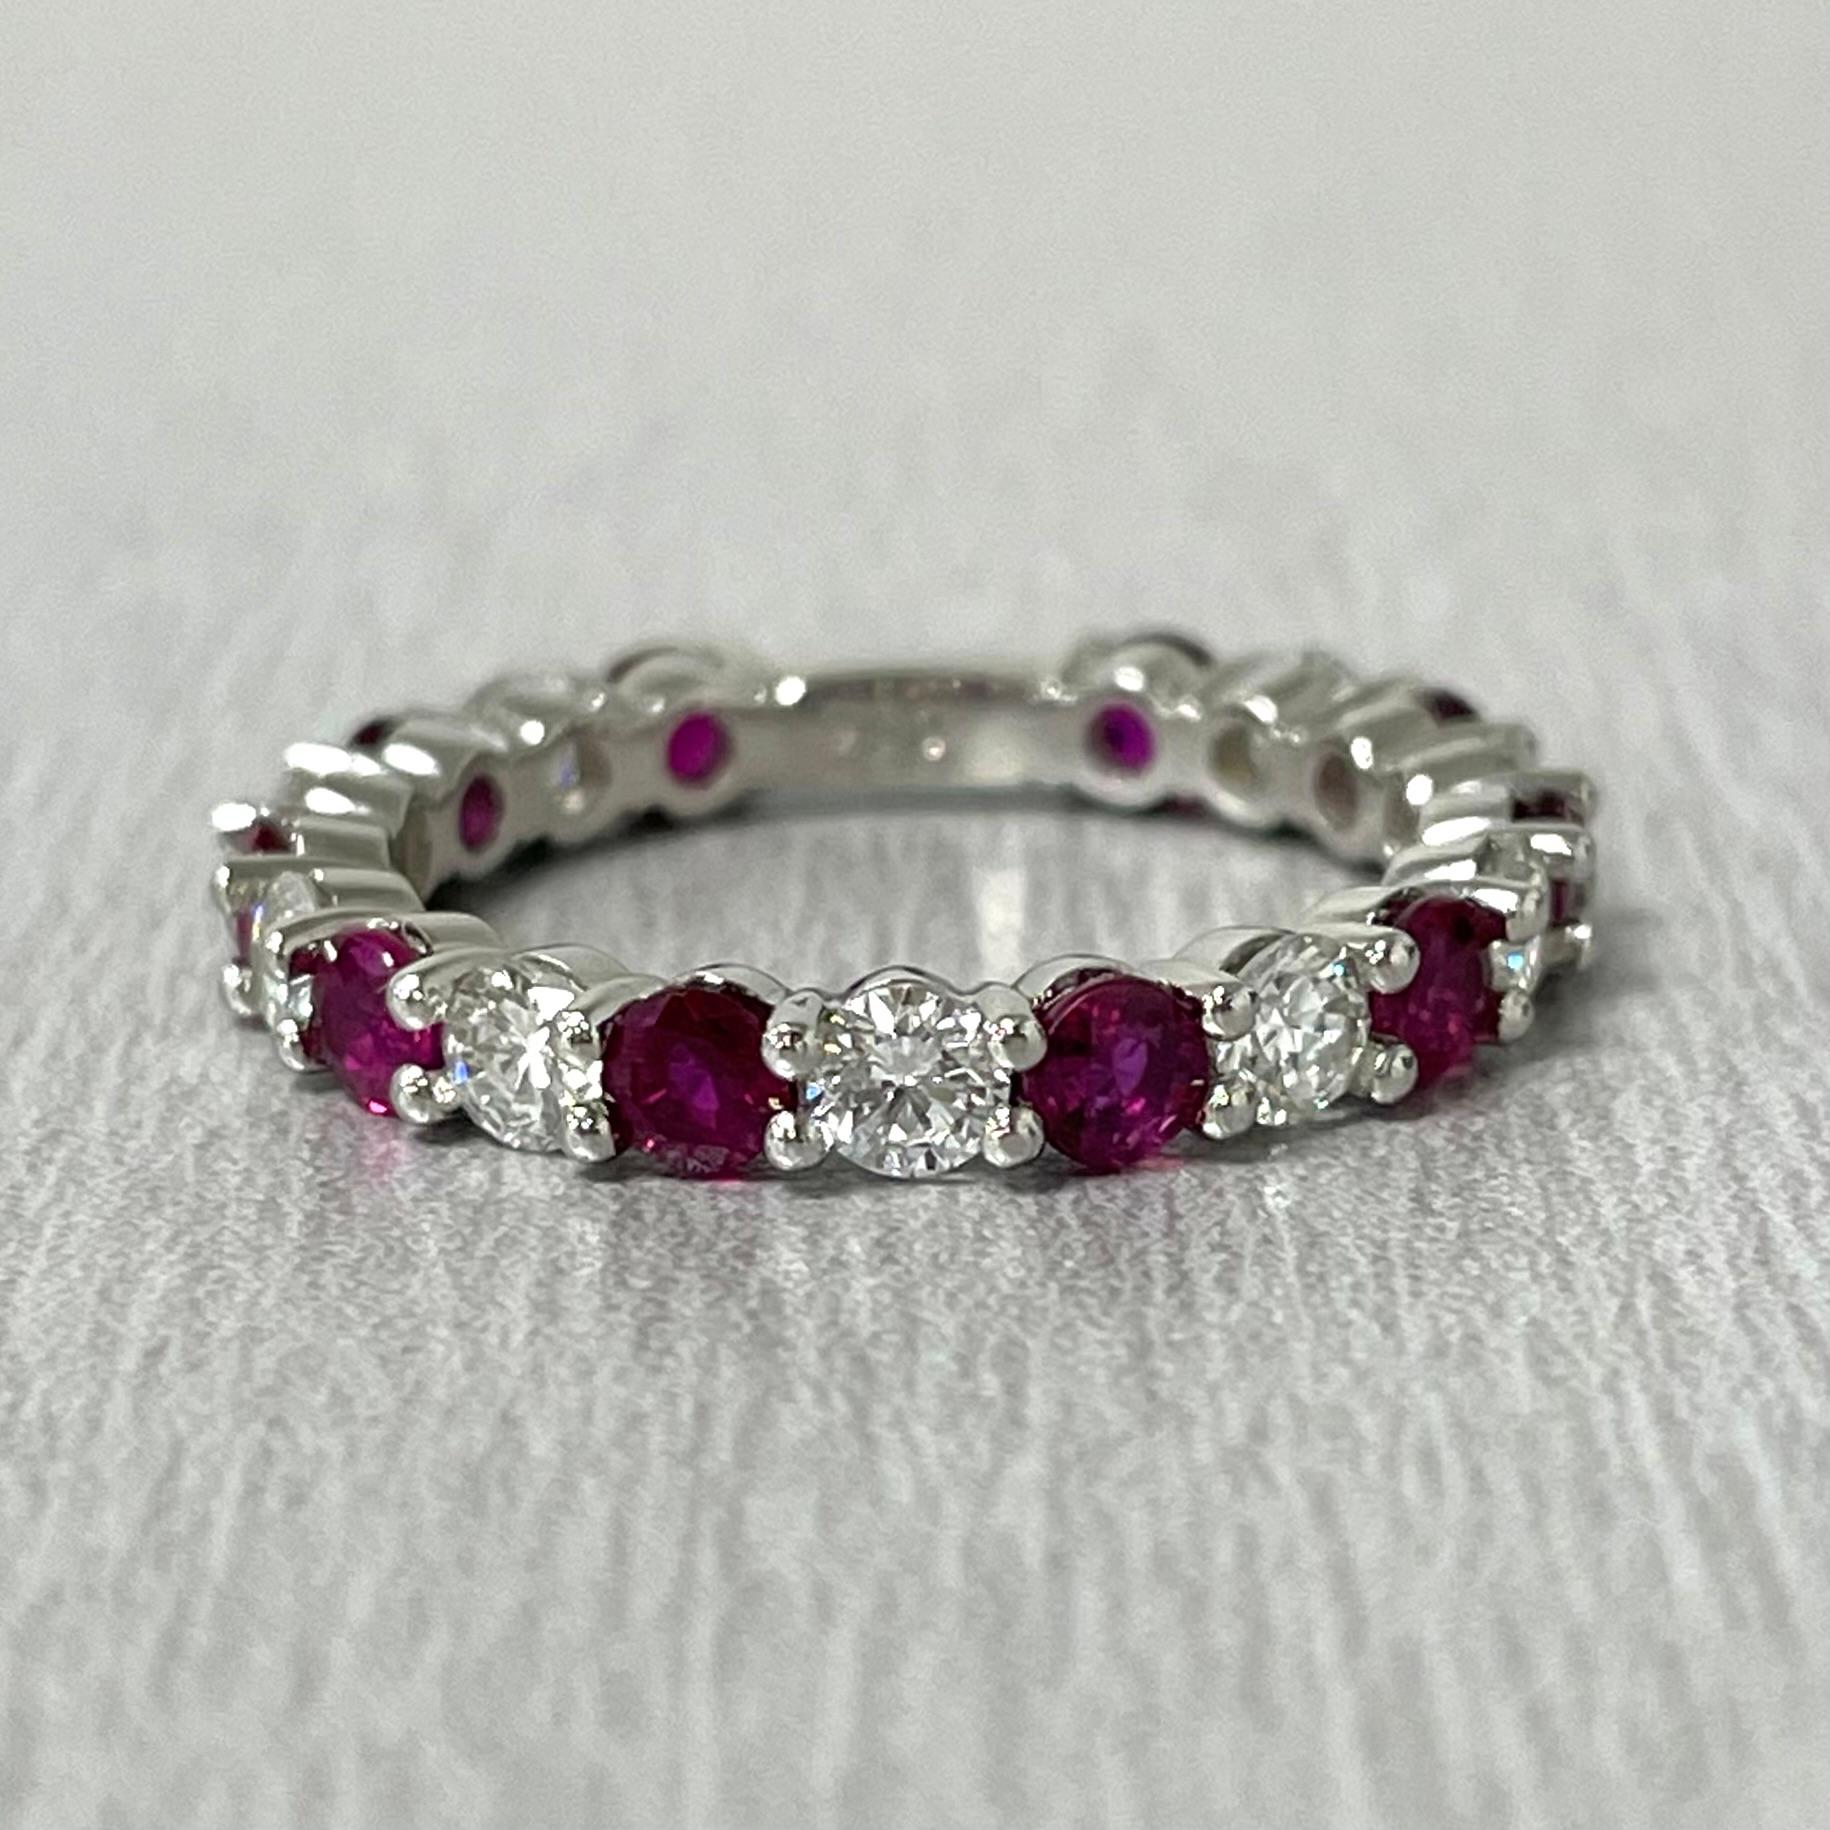 Contemporary Beauvince Ruby & Diamond Almost Eternity Band '2.34ct Gemstones' in Platinum